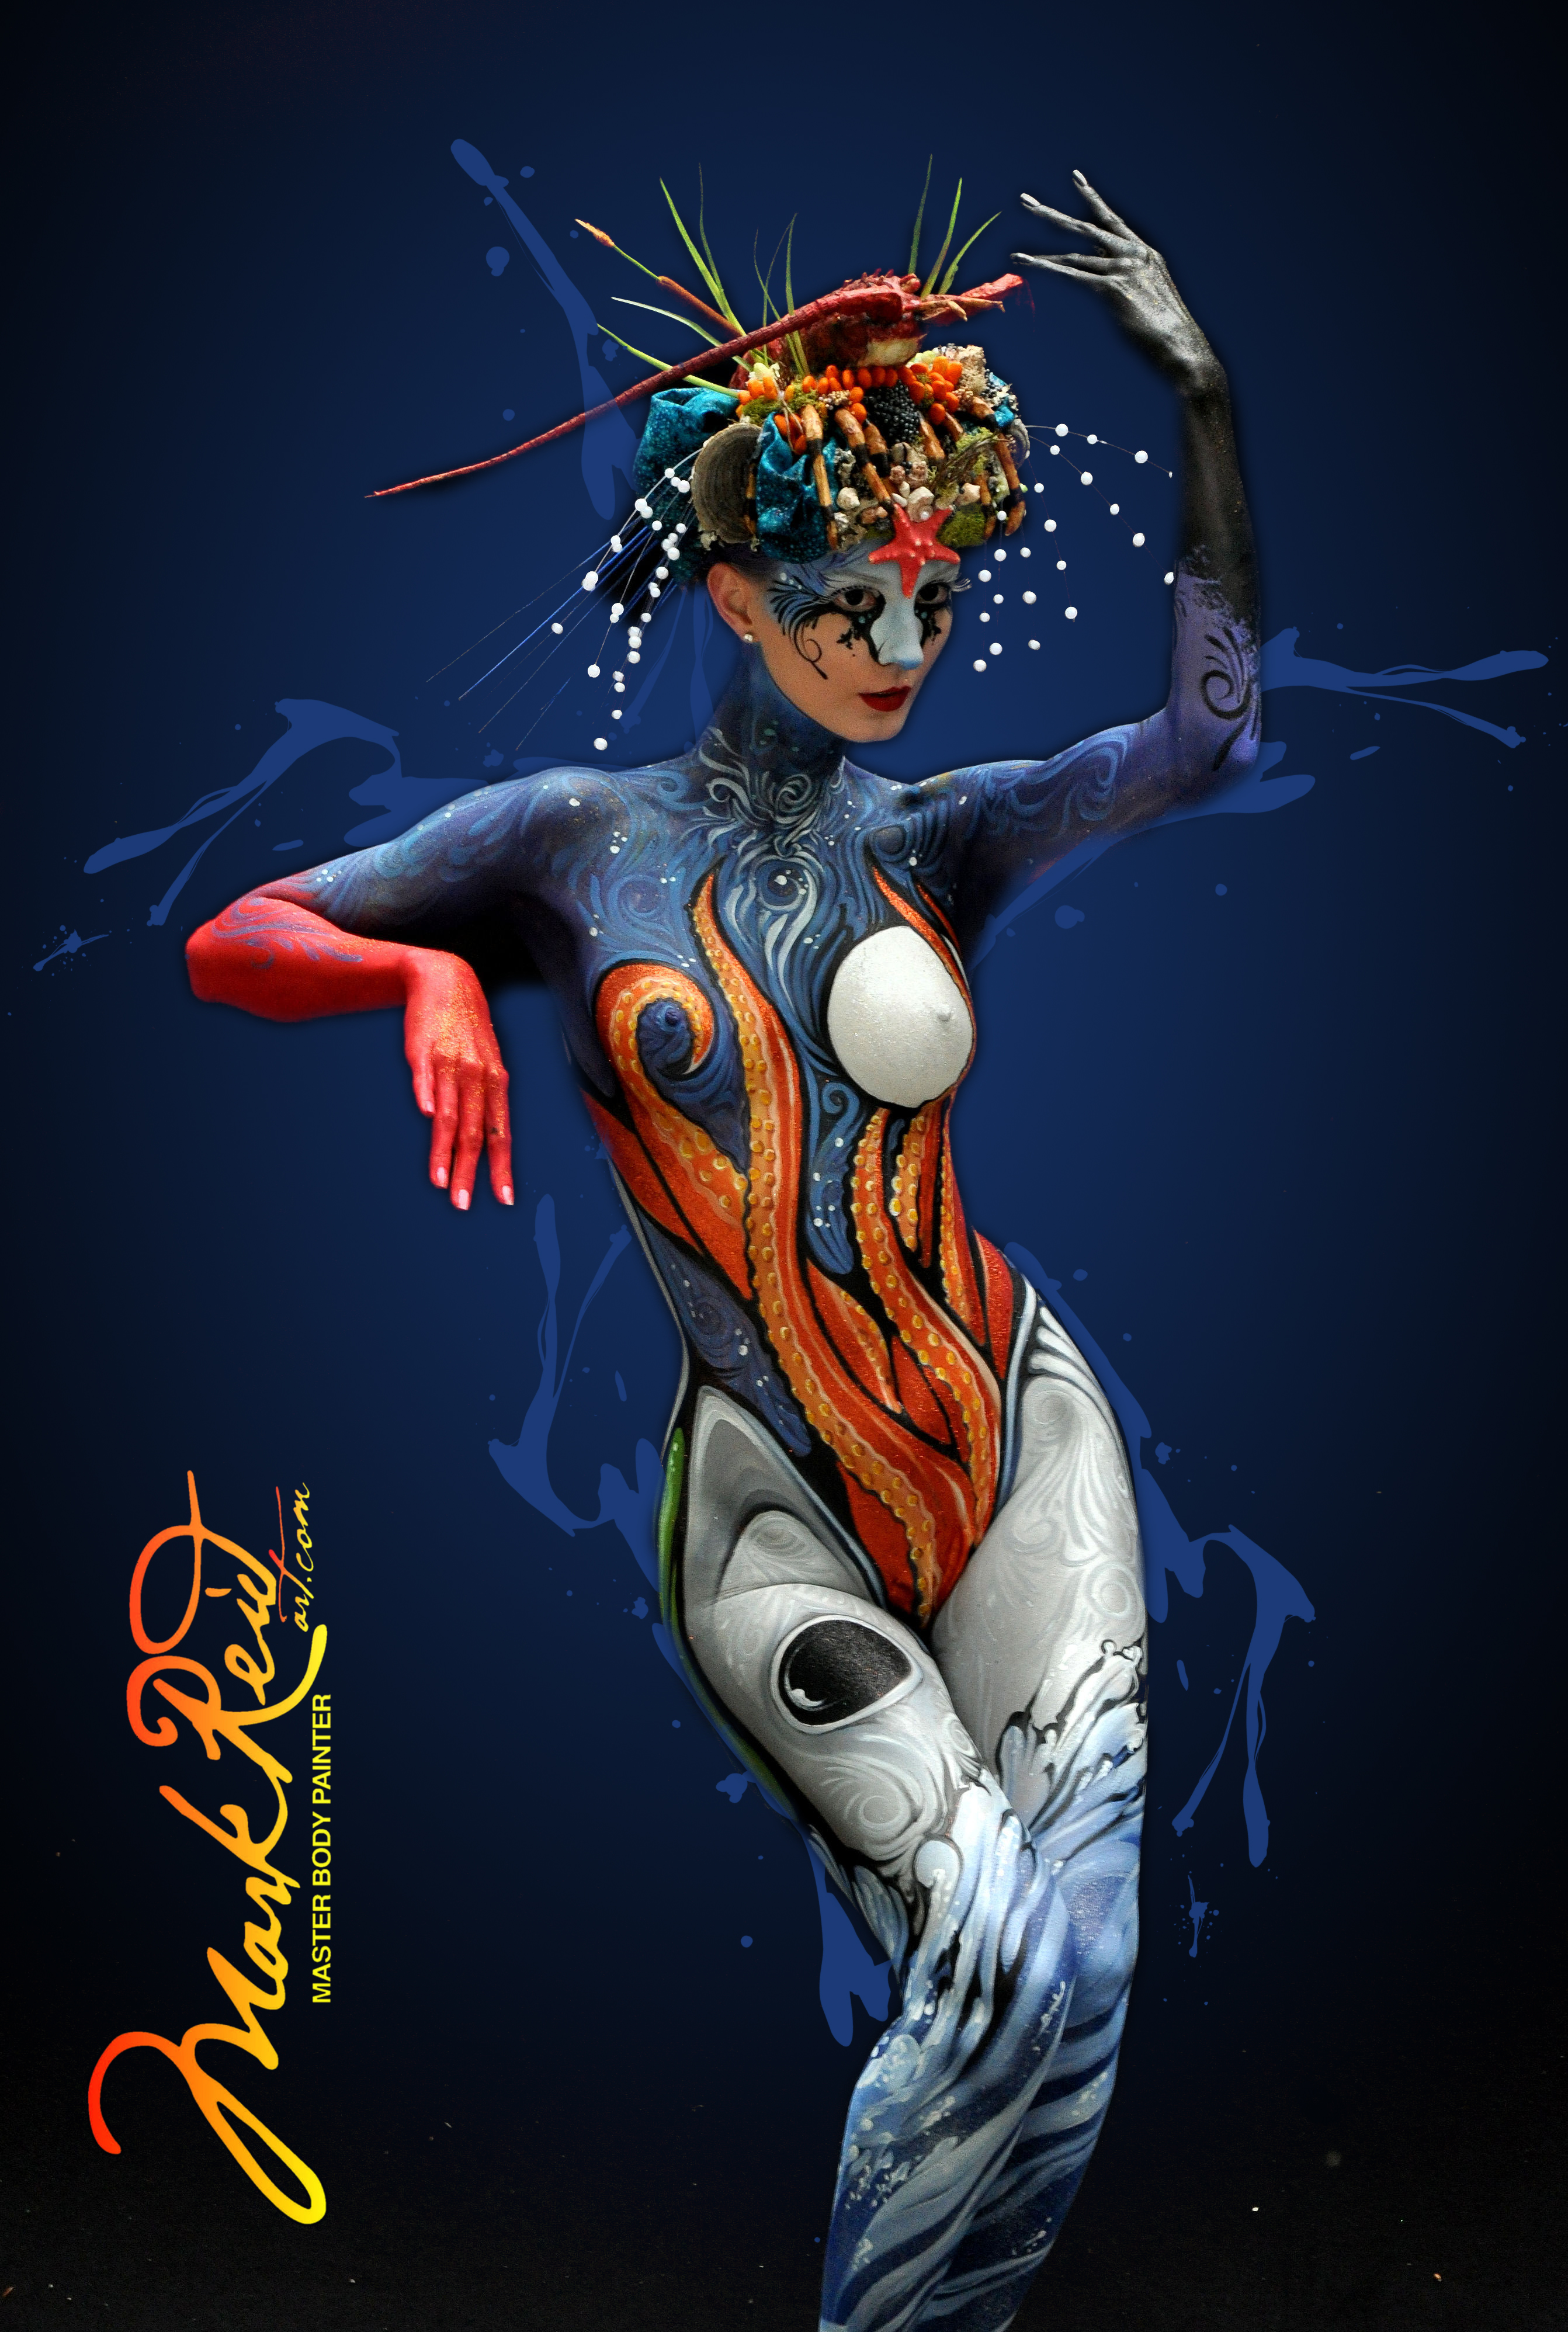 Funky colorful aquatic themed full body painting